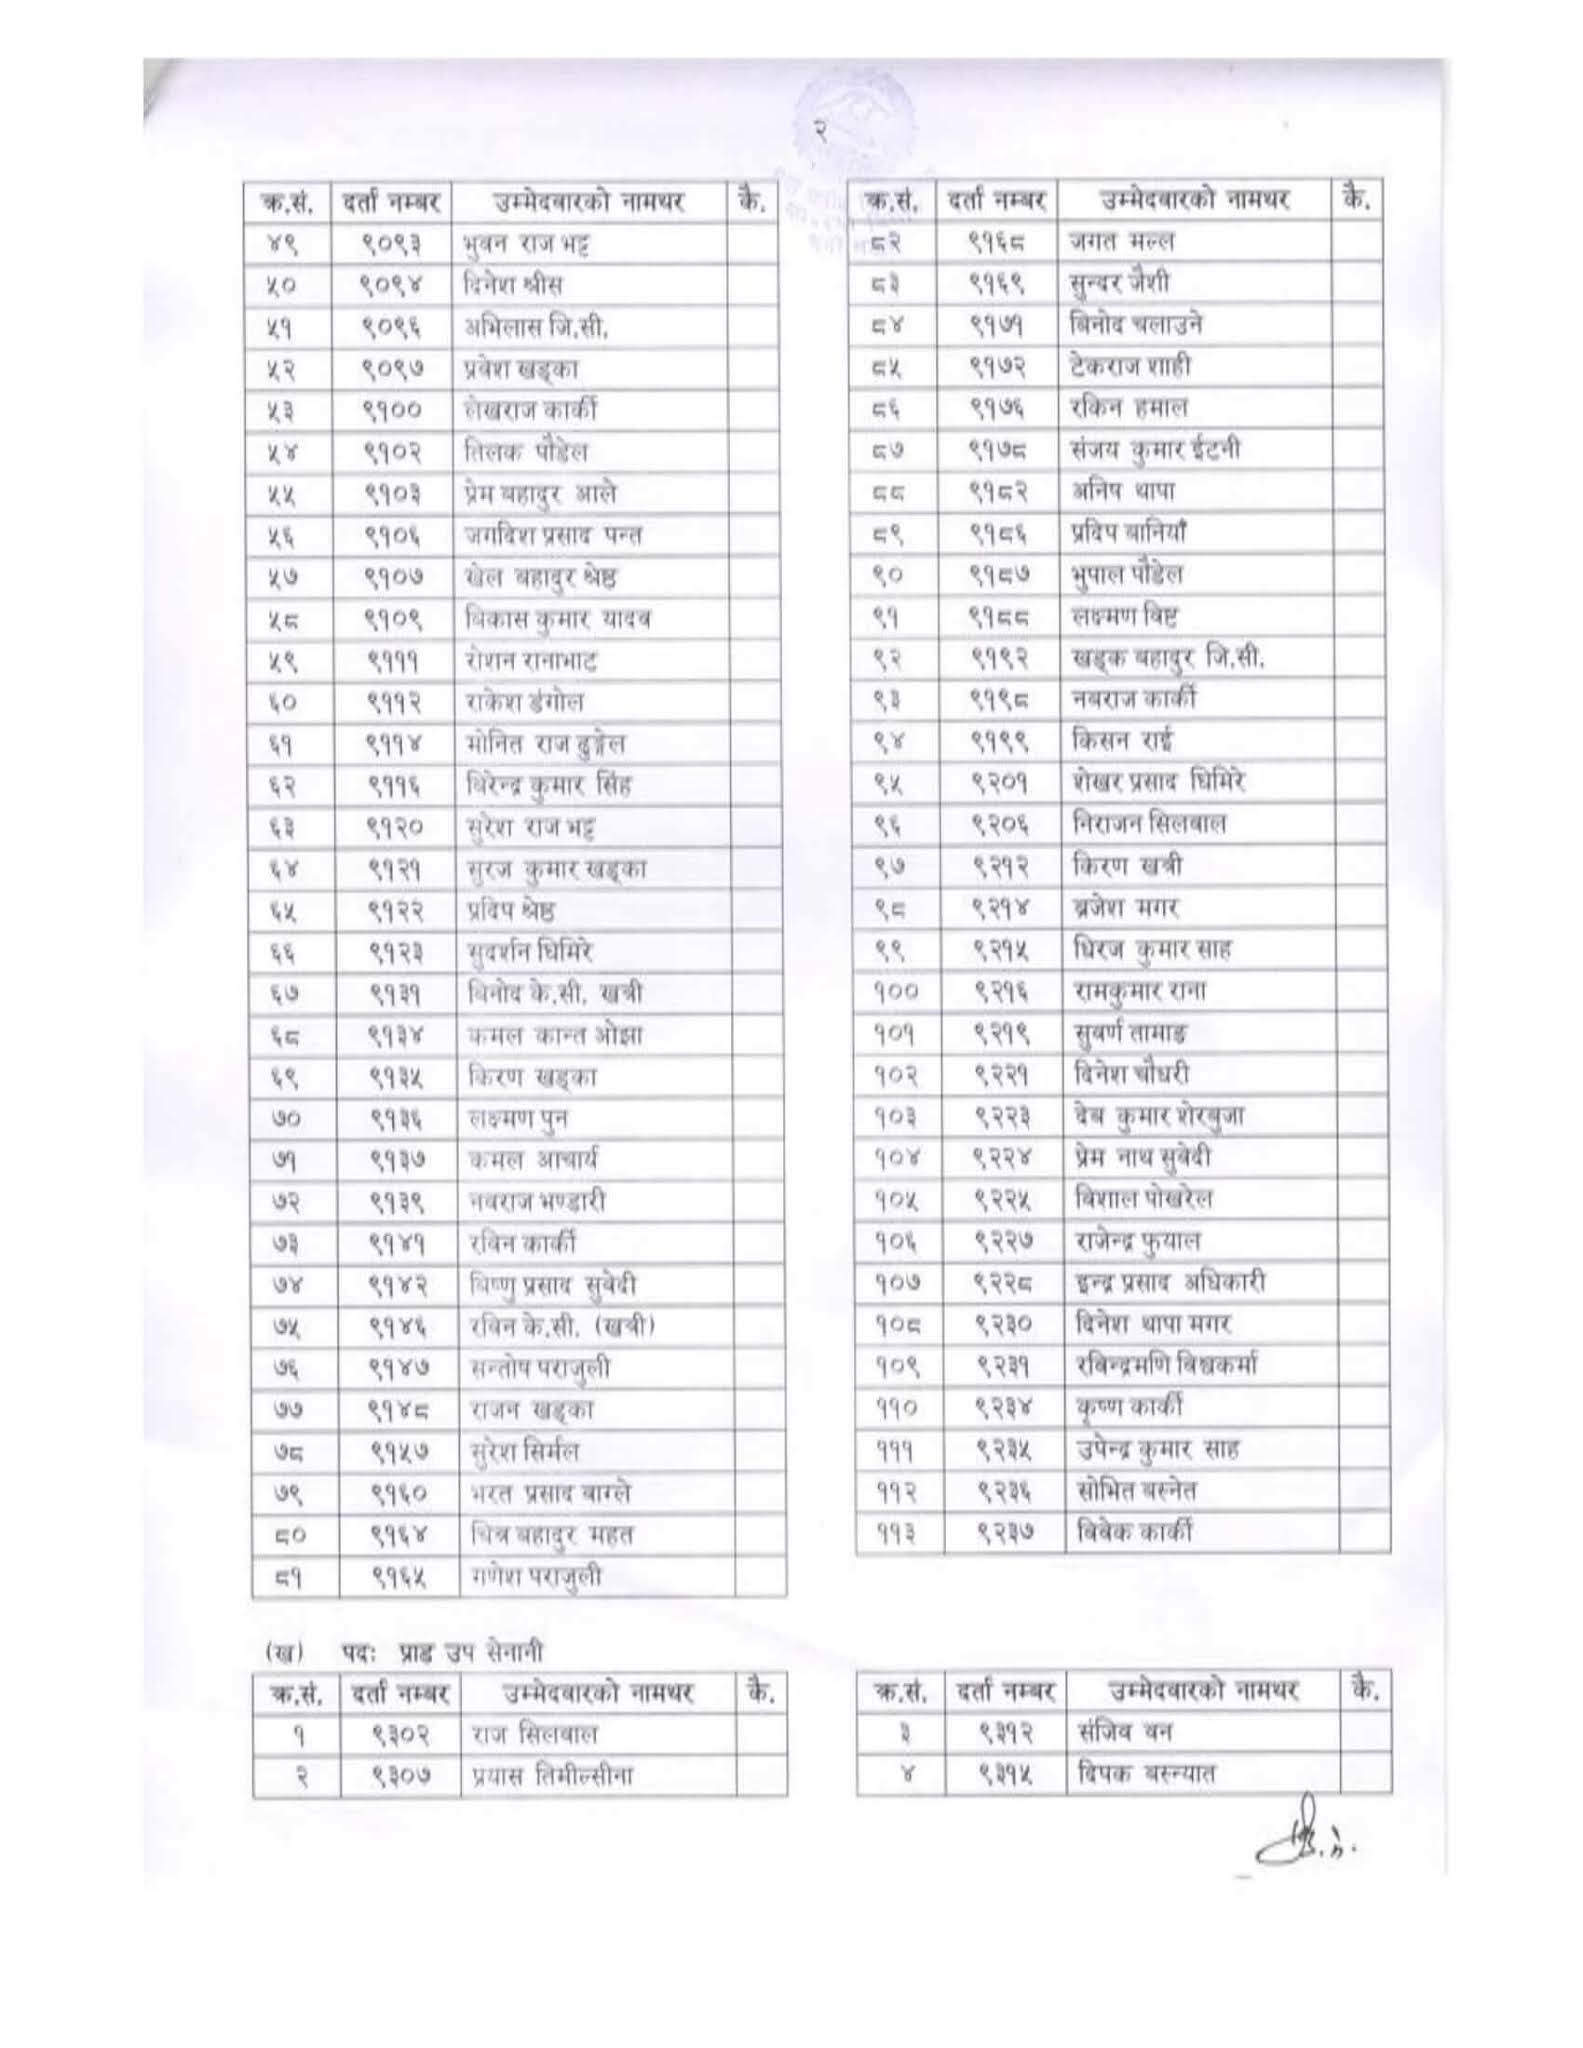 Nepal Army 1 Mile Running Exam Result Male Candidate (2078-07-25)